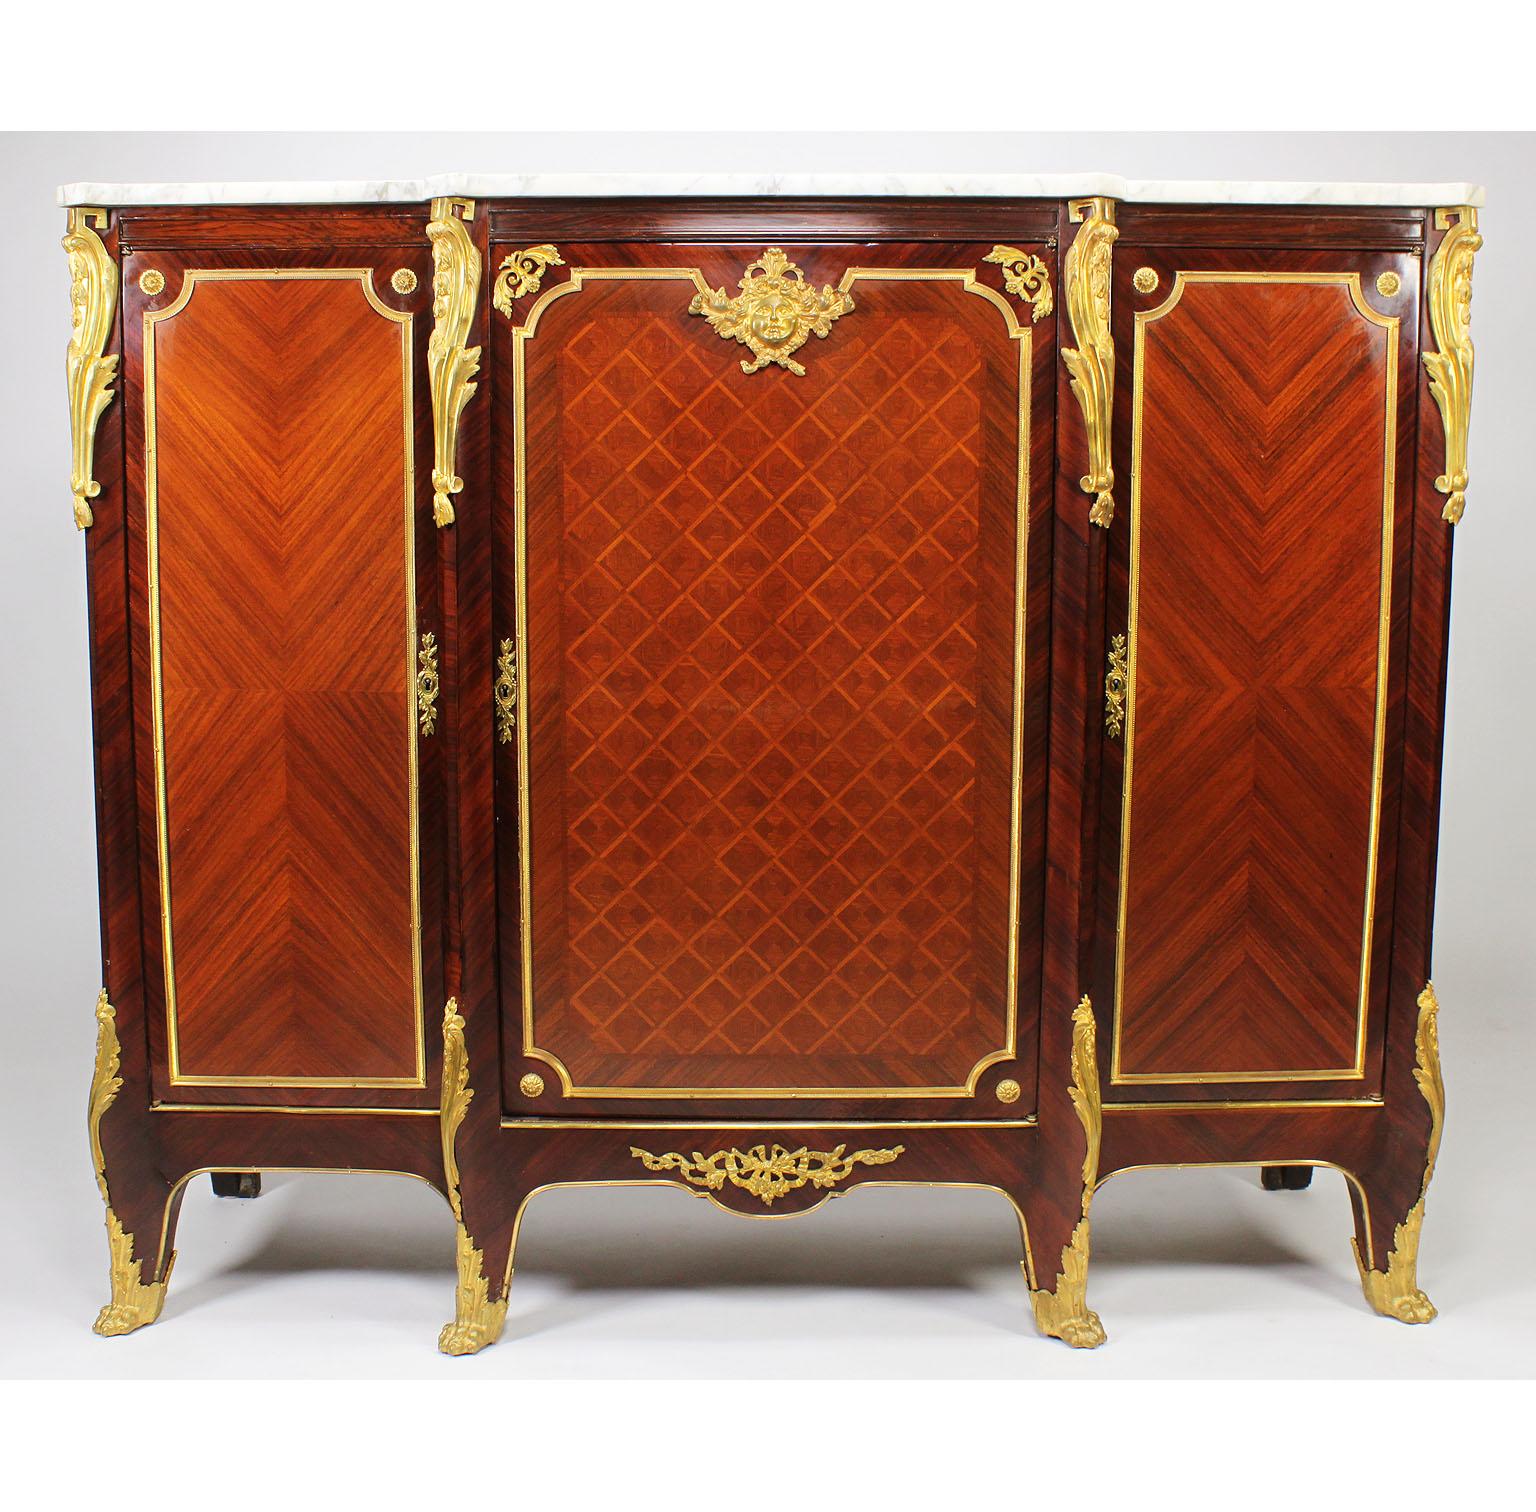 A French 19th-20th century Louis XV style tulipwood parquetry and mahogany gilt-bronze mounted three-door Meuble d' Appui (Side cabinet) with marble top, Paris, circa 1900.

Measures: Height 44 inches (111.8 cm)
Length 53 3/4 inches (136.5